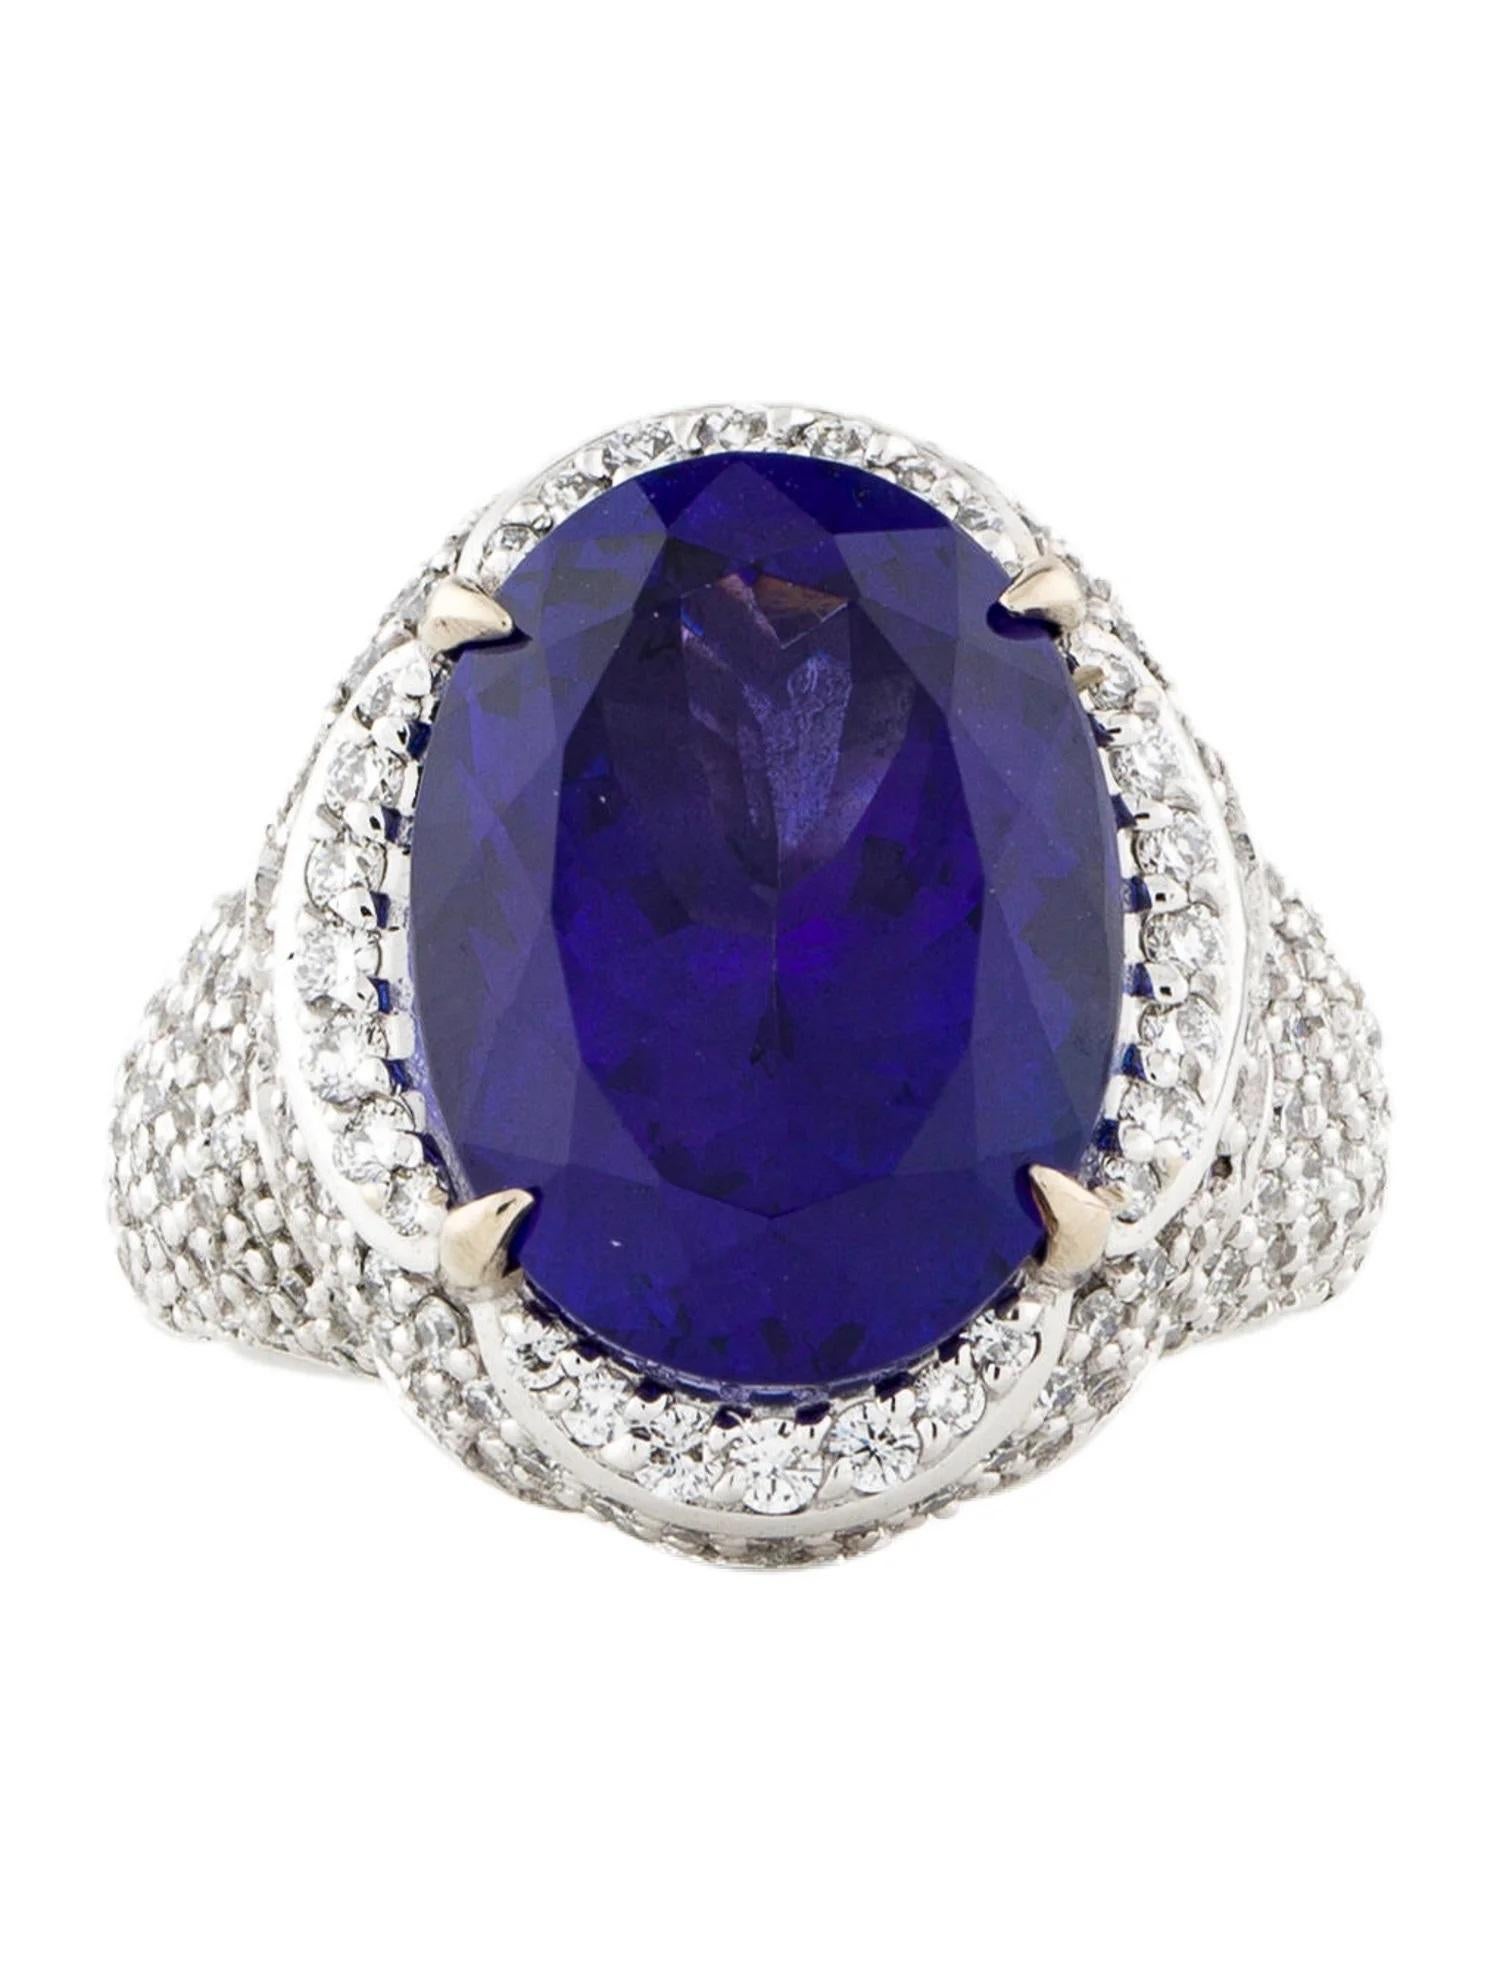 10.89 Ct Tanzanite Oval AA Ring

There seems to be no end to its velvety depths. An incredible Bluish hue that defies description. Fine cutting, wonderful brilliance and flawless clarity complete the package. It is above the 10 carat investor's